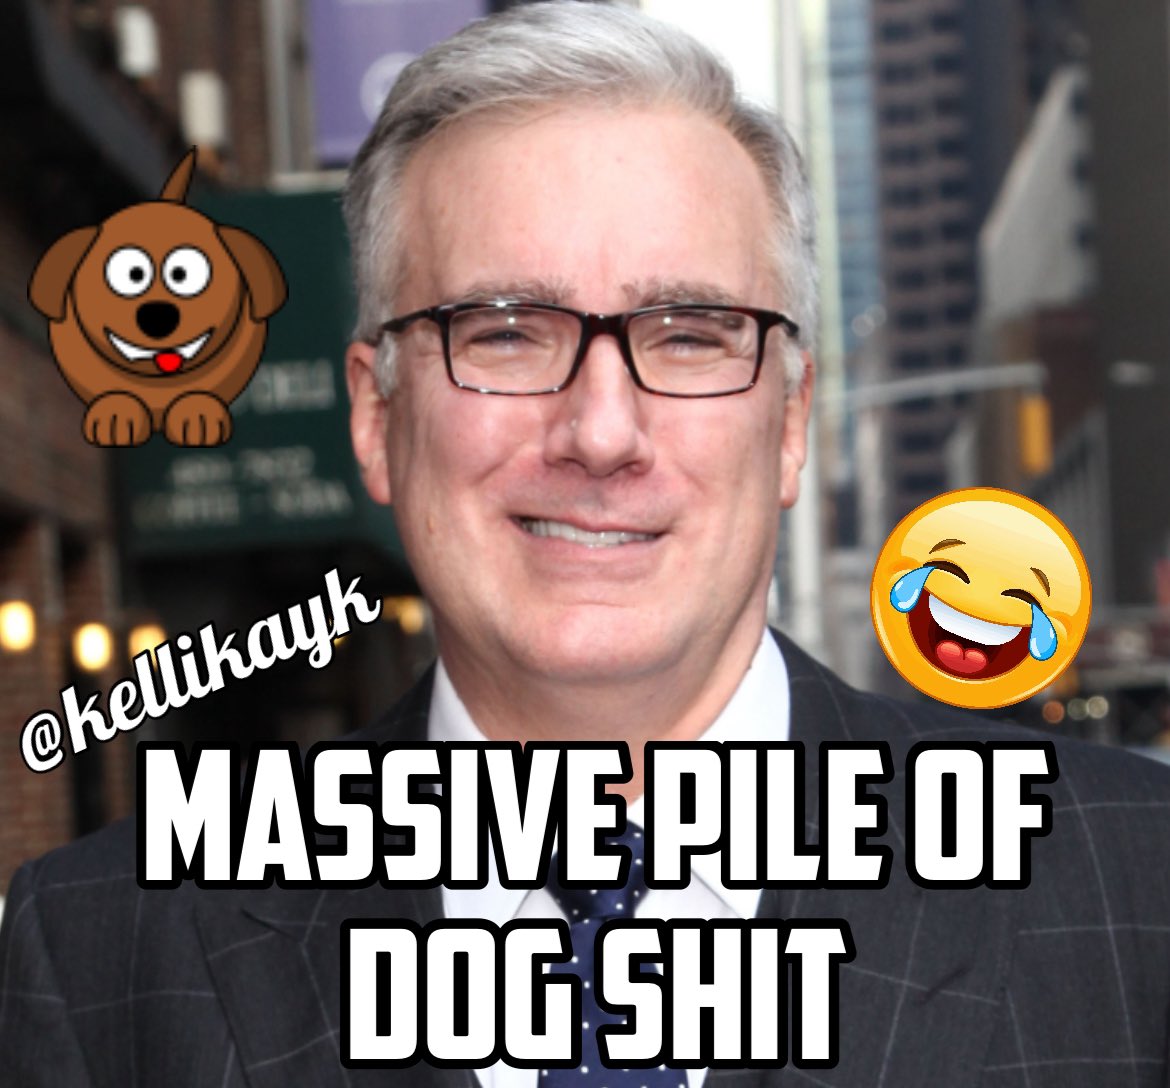 Keith Olbermann said “honest to God, Alina Habba is hall of fame level unqualified” 🤔

Who thinks Keith is a massive pile of dog shit 😆 👇